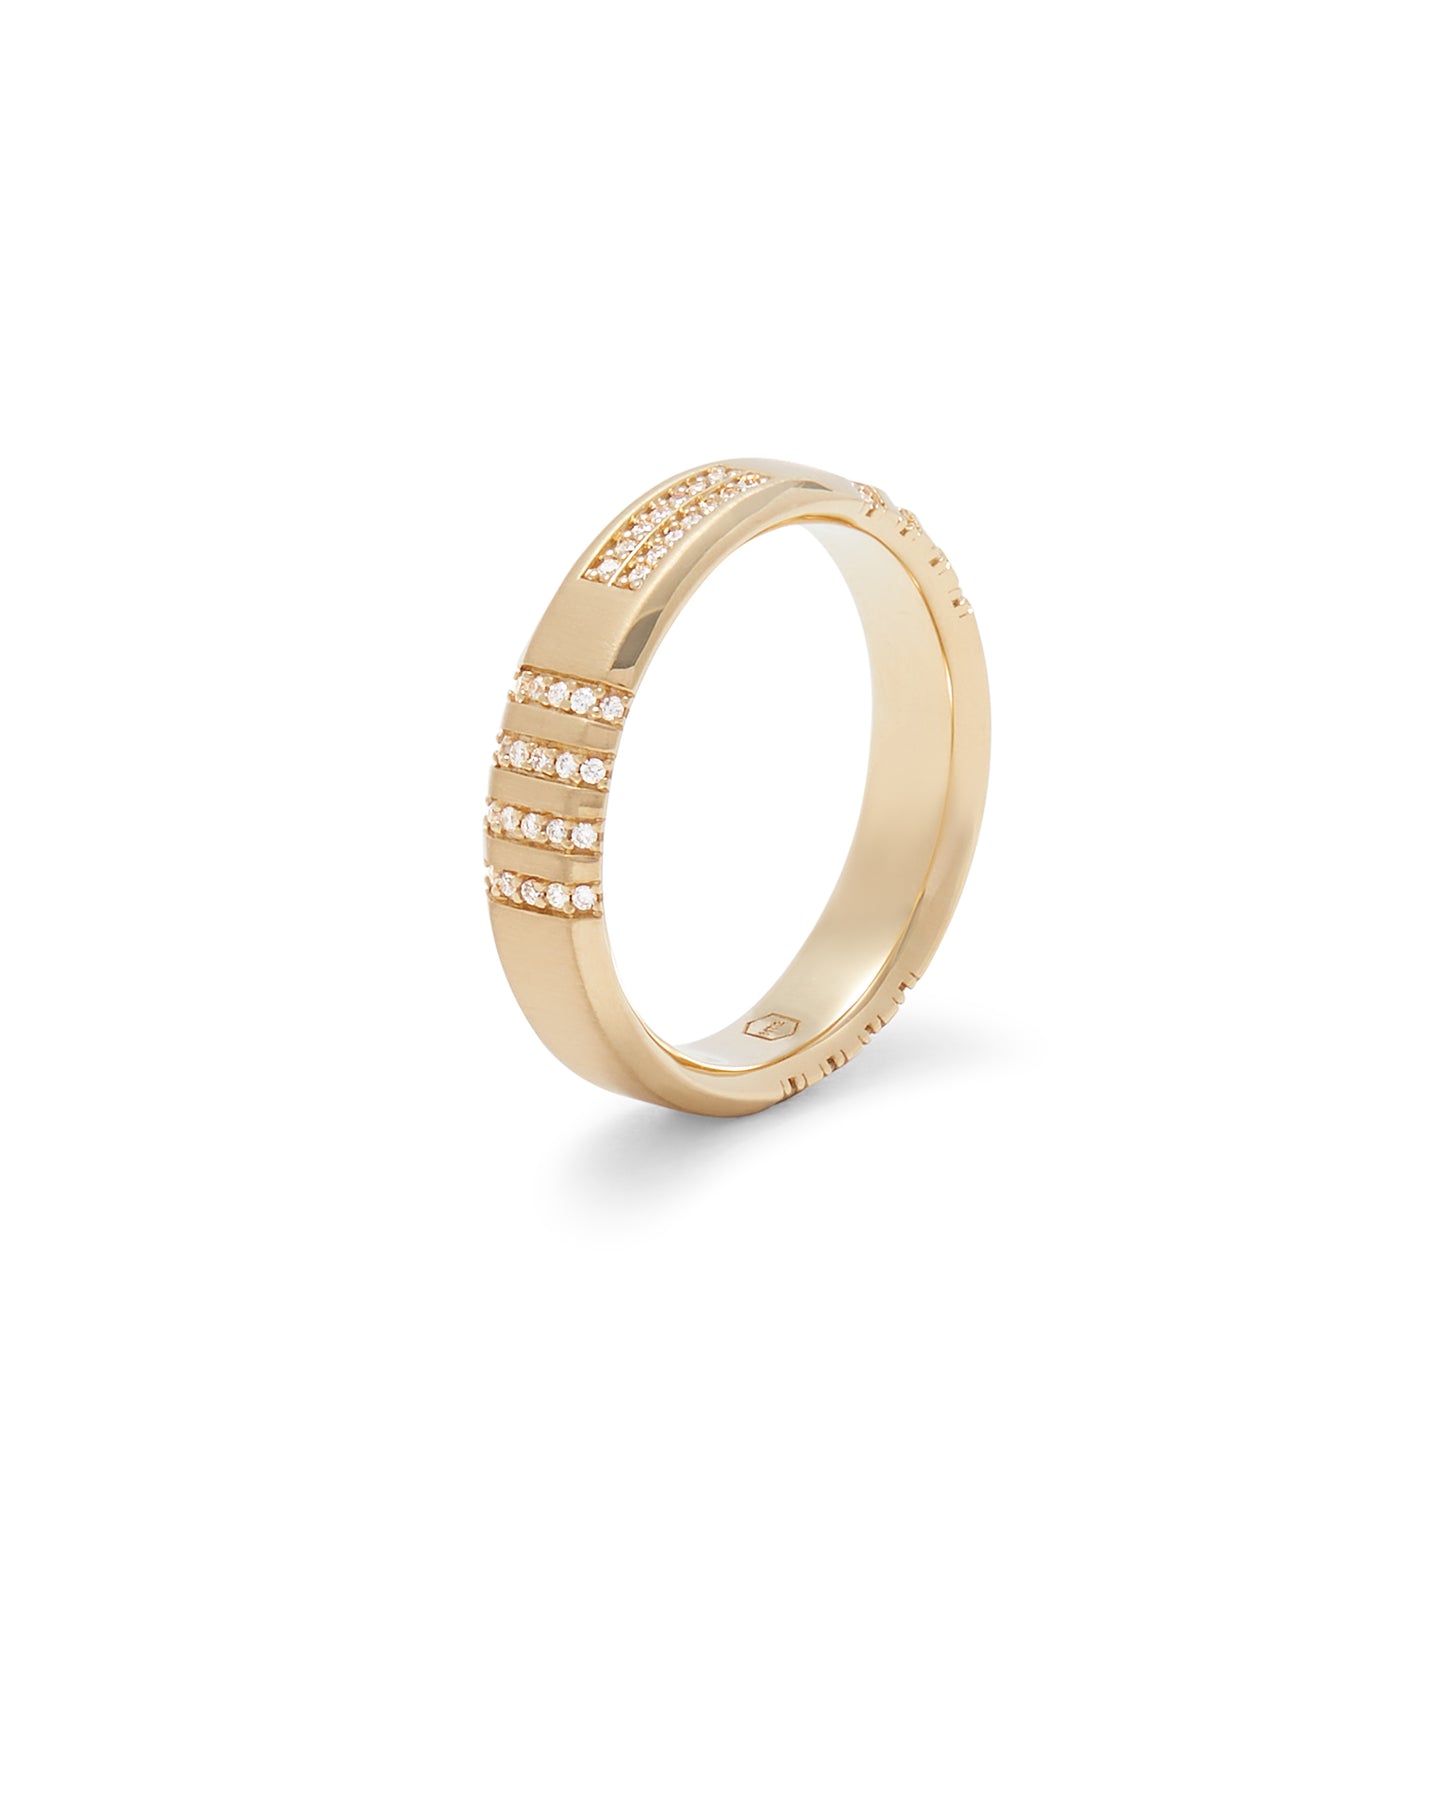 Spindle Ring in 18K Gold with Natural Diamonds